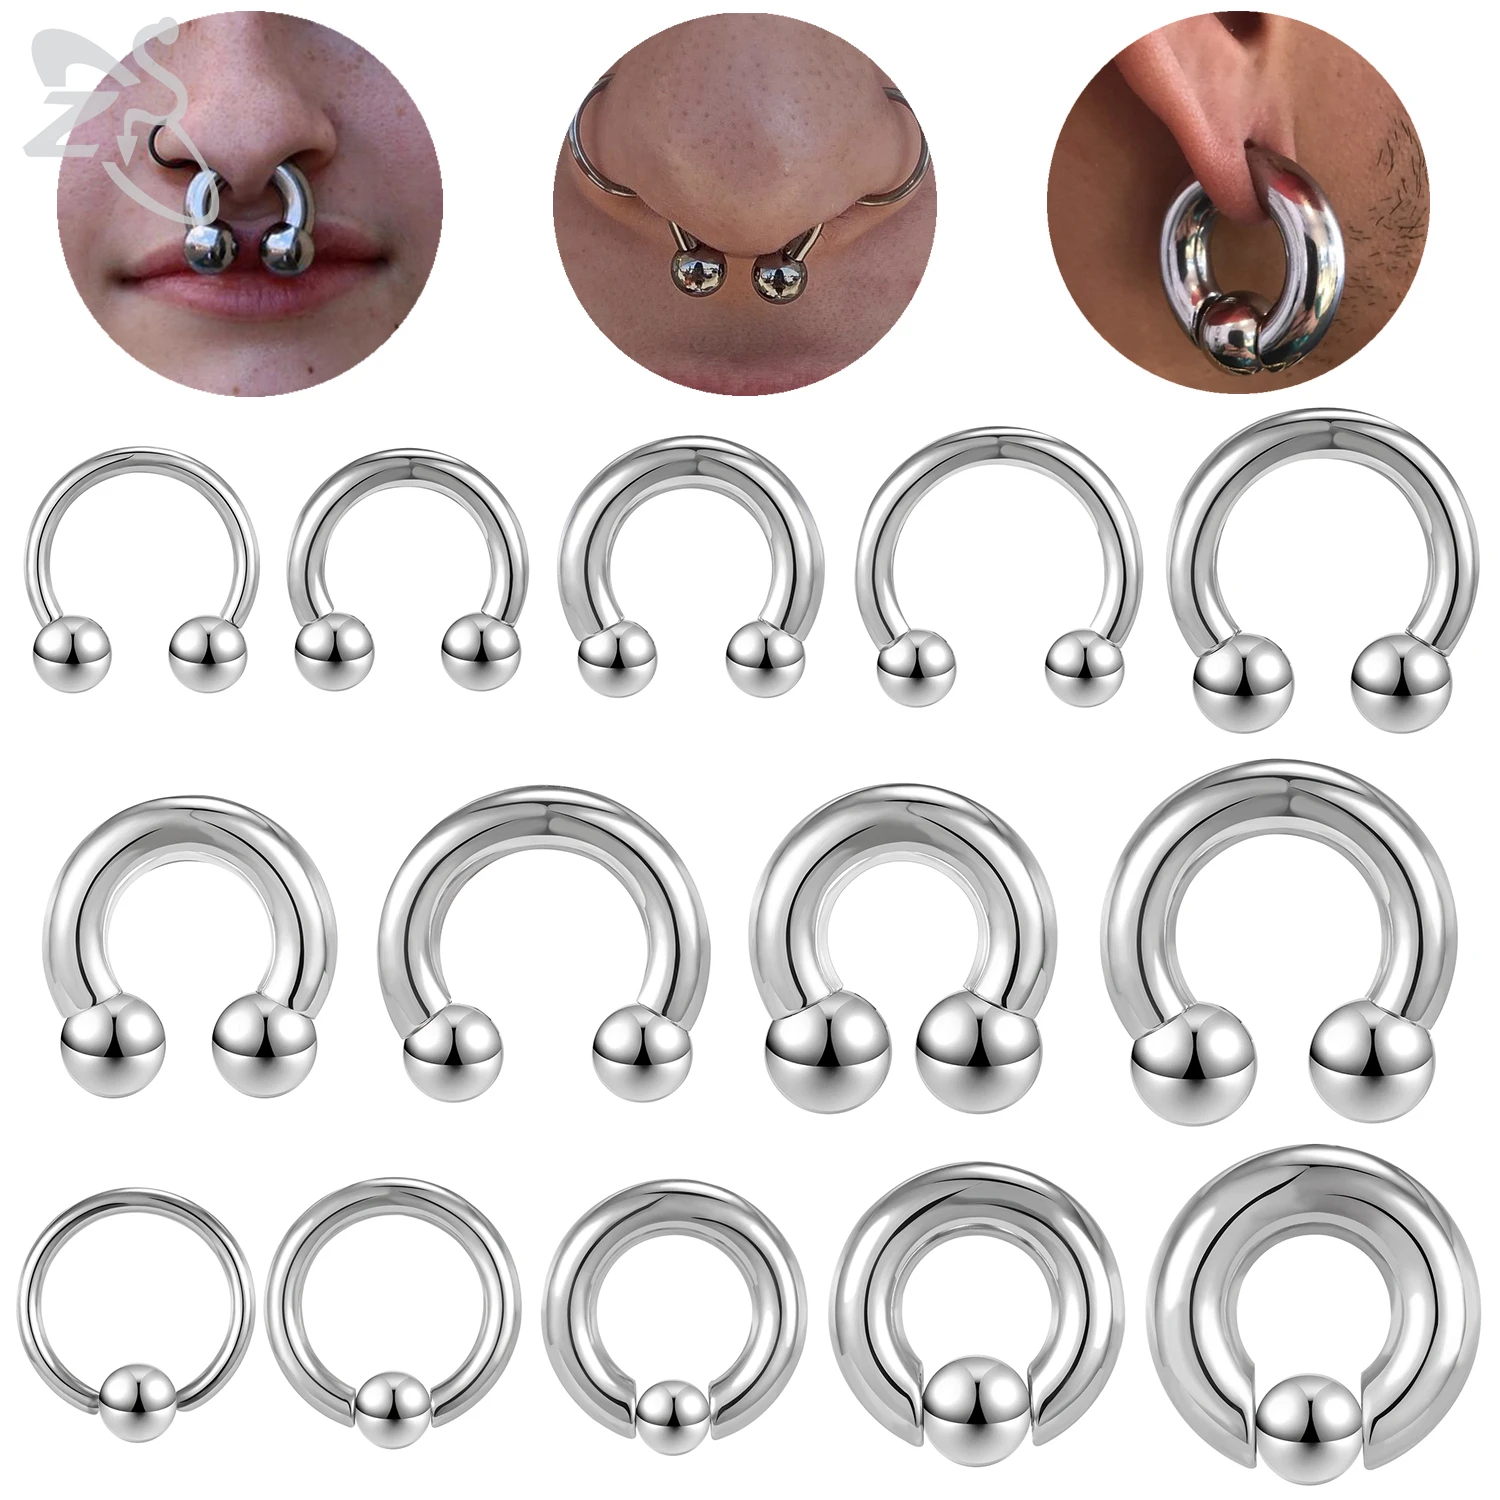 

ZS 1 PC 2/4/6/8G Stainelss Steel Horseshoe Nose Ring Internal Threaded Large Gauge Piercings Noses Ear Expander Septum Piercing